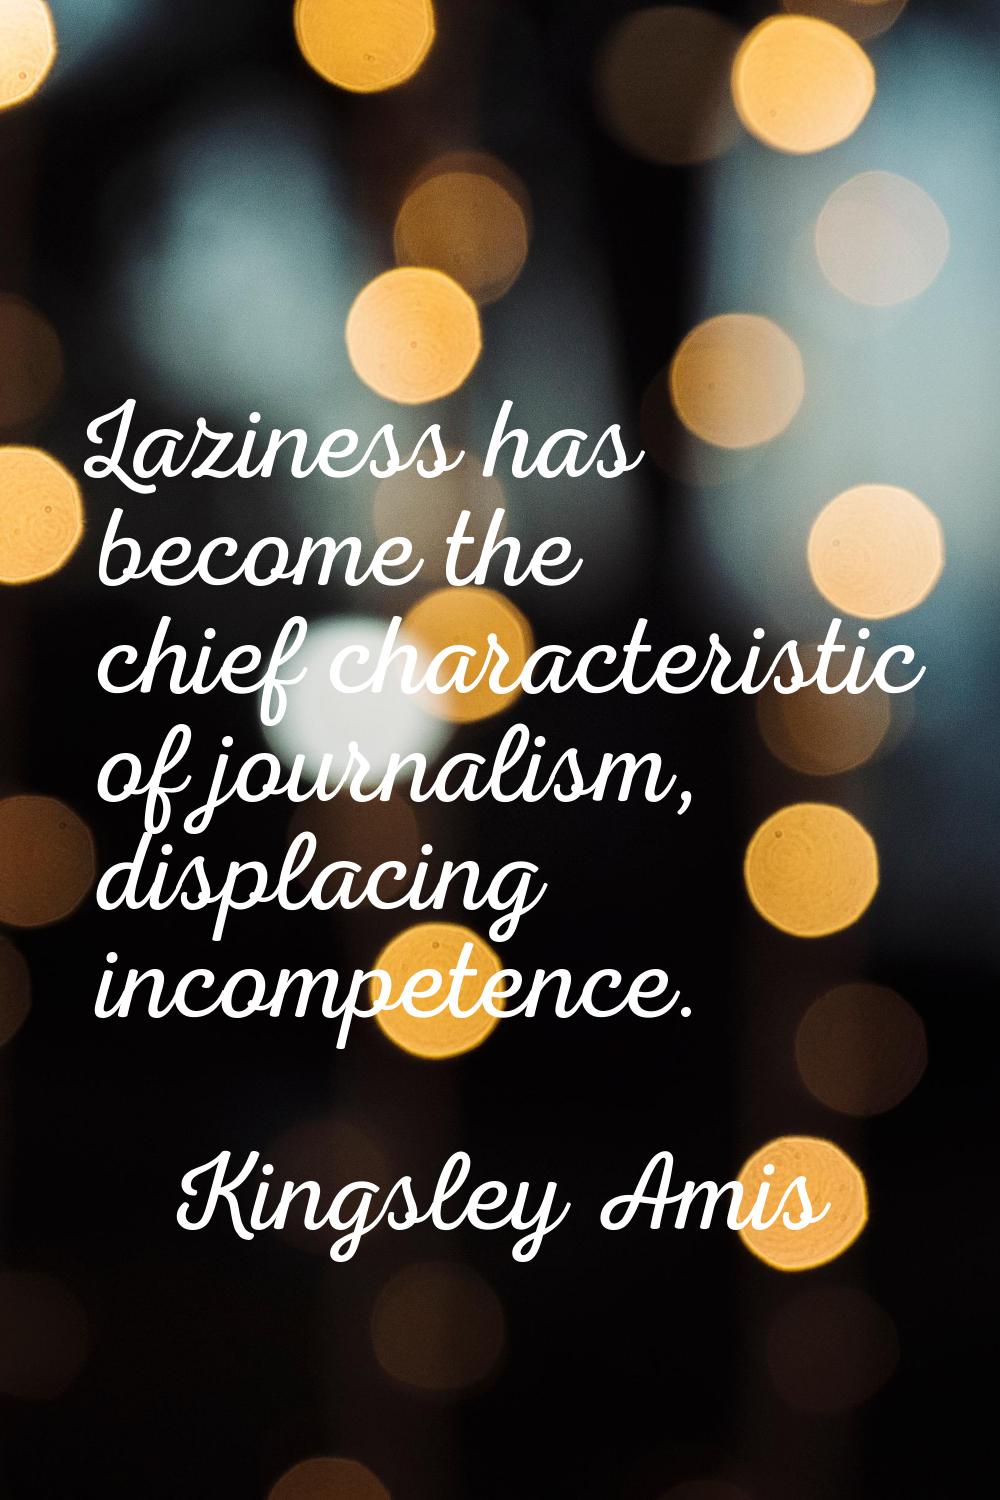 Laziness has become the chief characteristic of journalism, displacing incompetence.